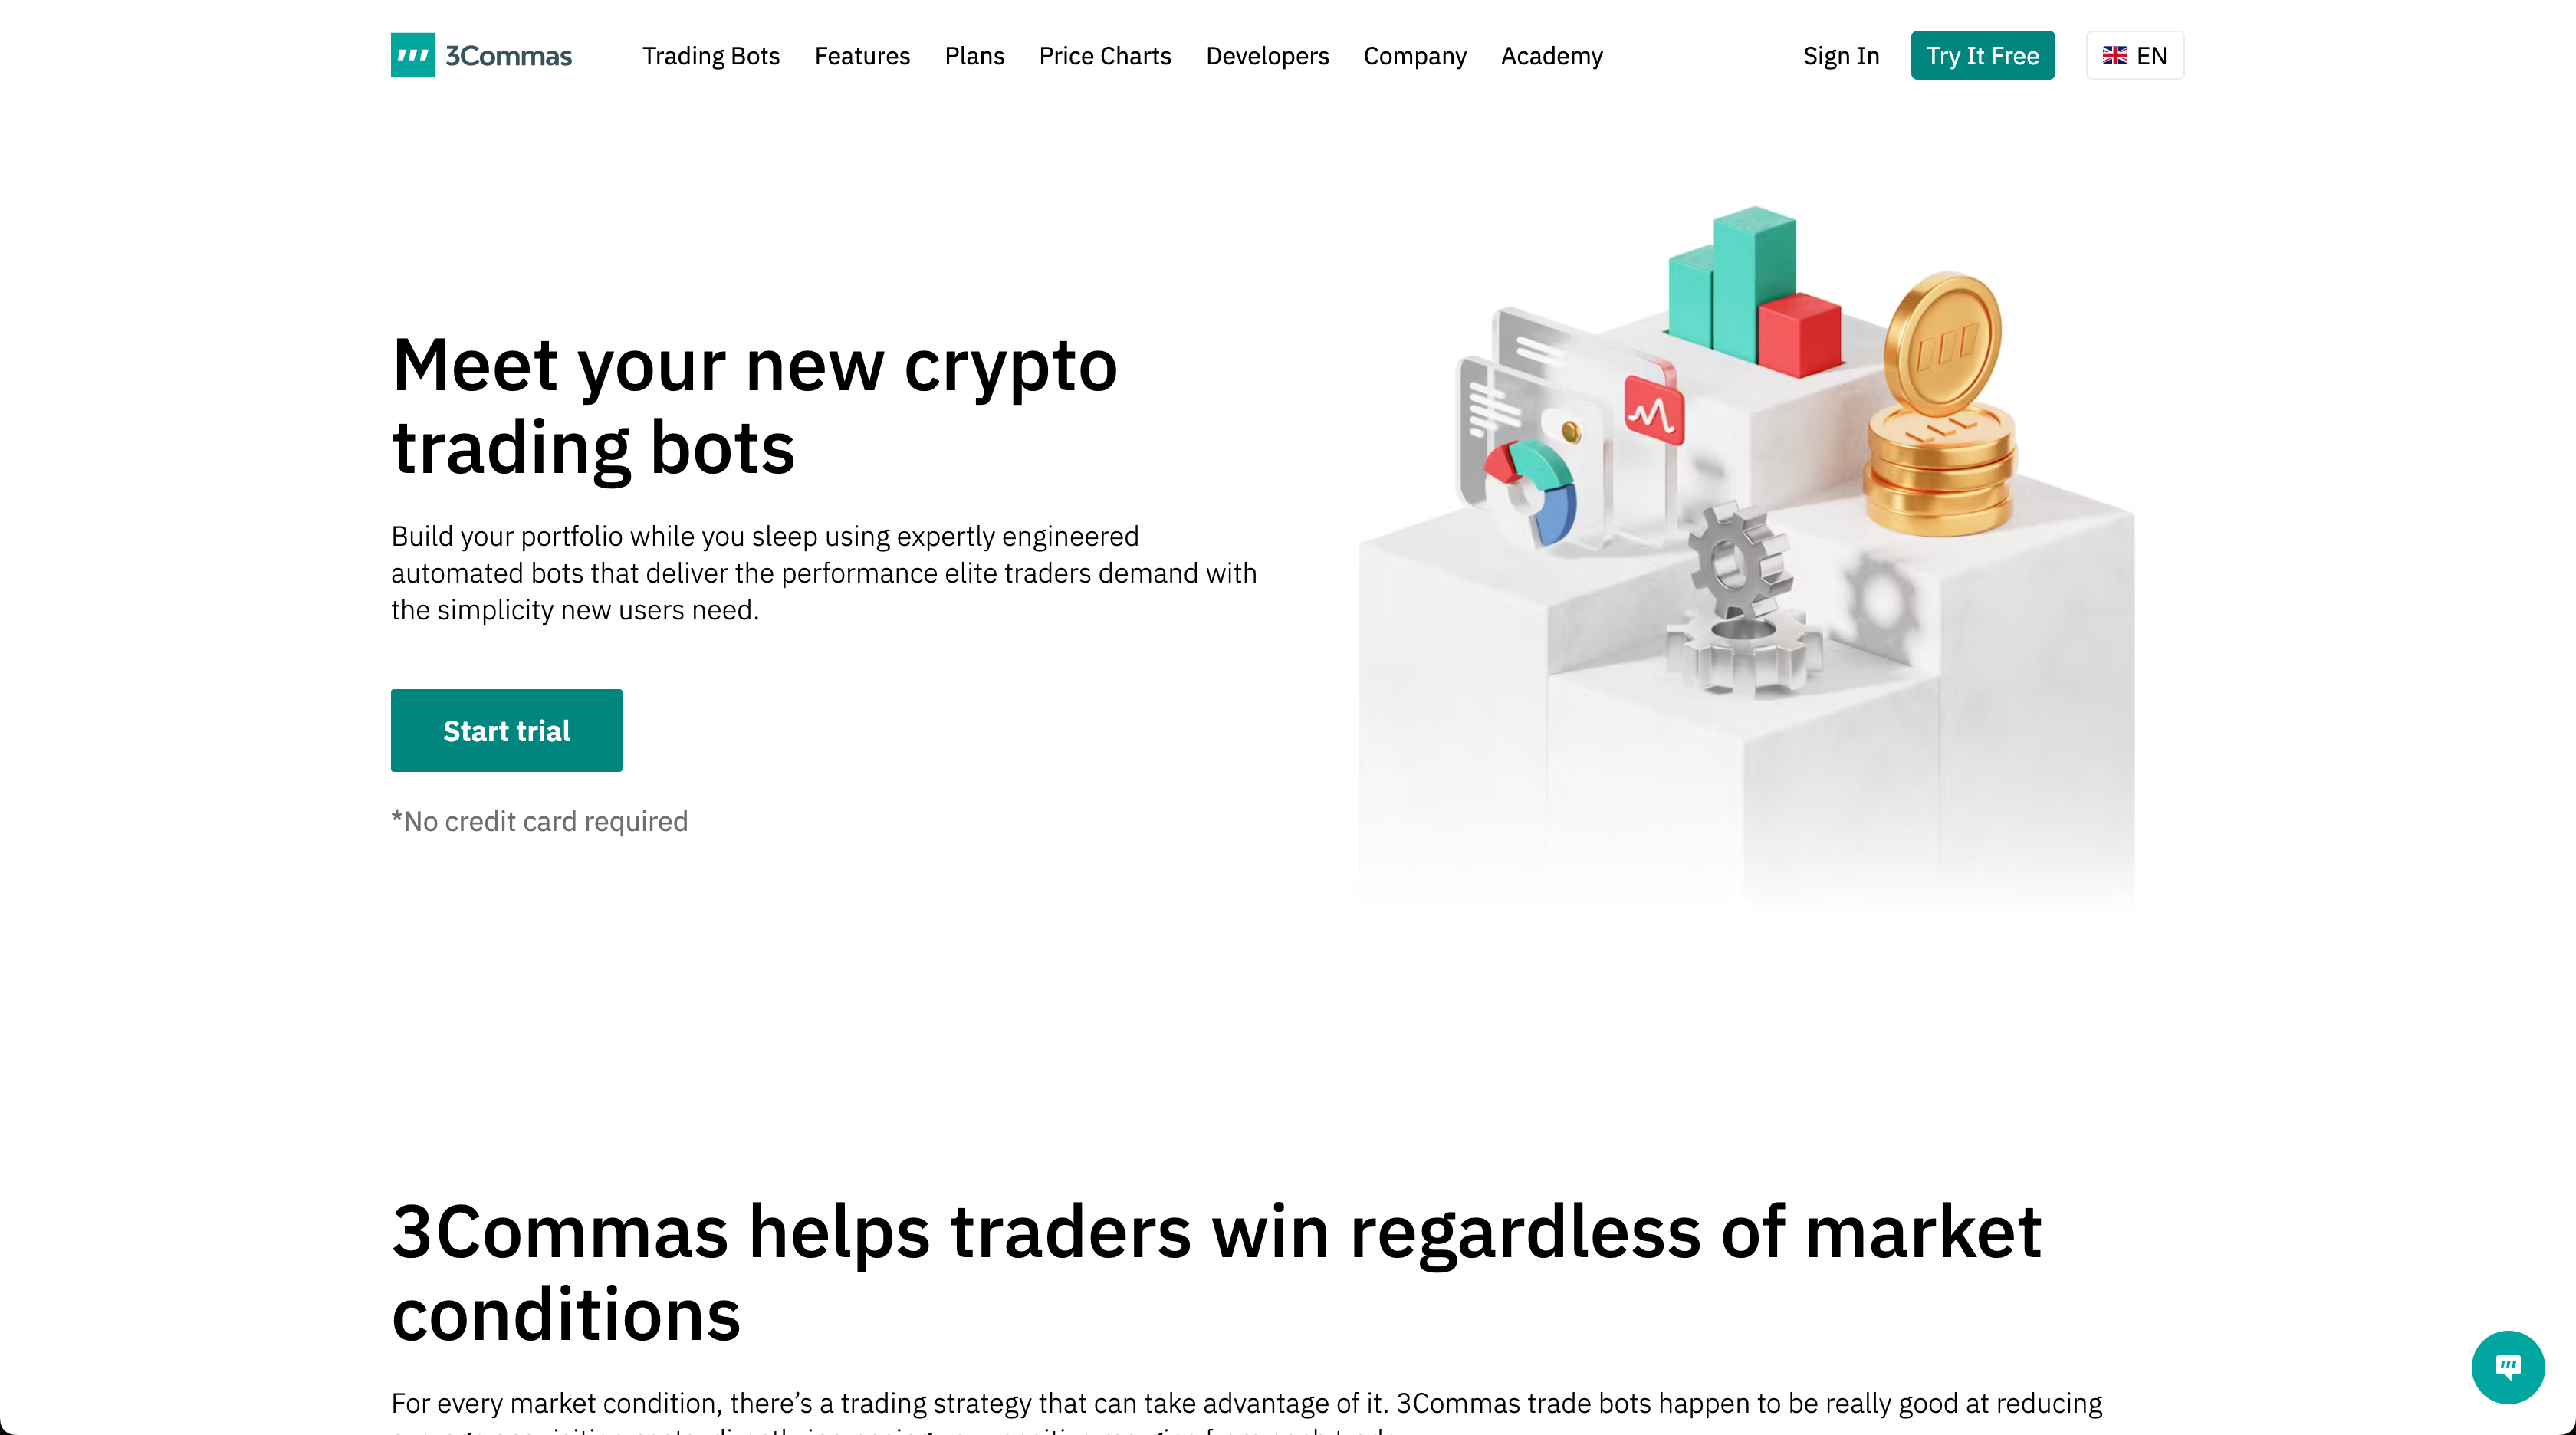 Streamline Crypto Trading with Smart Automation